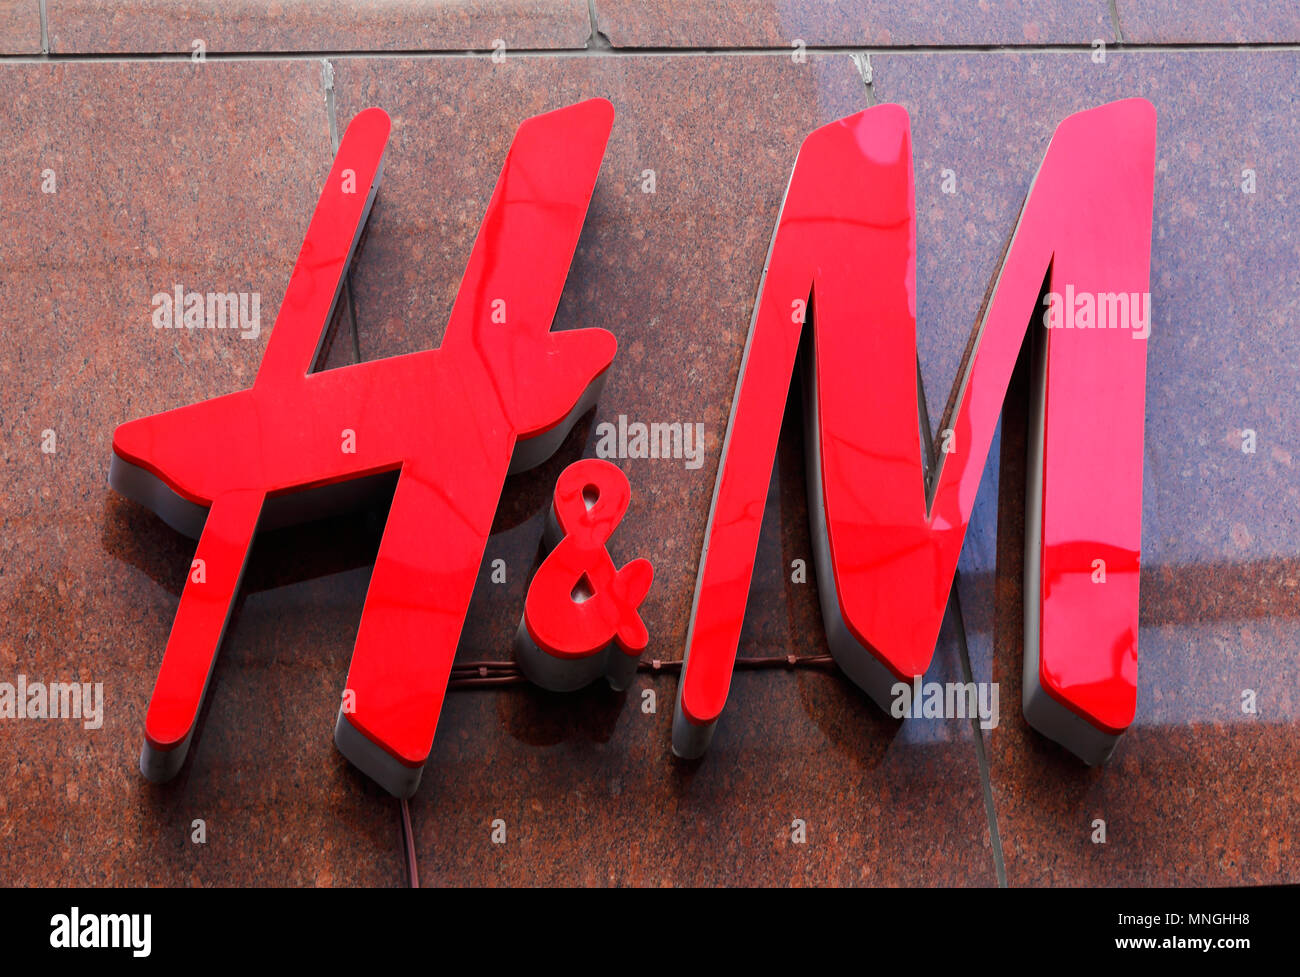 Stockholm, Sweden - May 18, 2017: The Swedish multinational clothing-retail  company Hennes and Mauritz H&M logo at shop on Klarabergsgatan in downtow  Stock Photo - Alamy